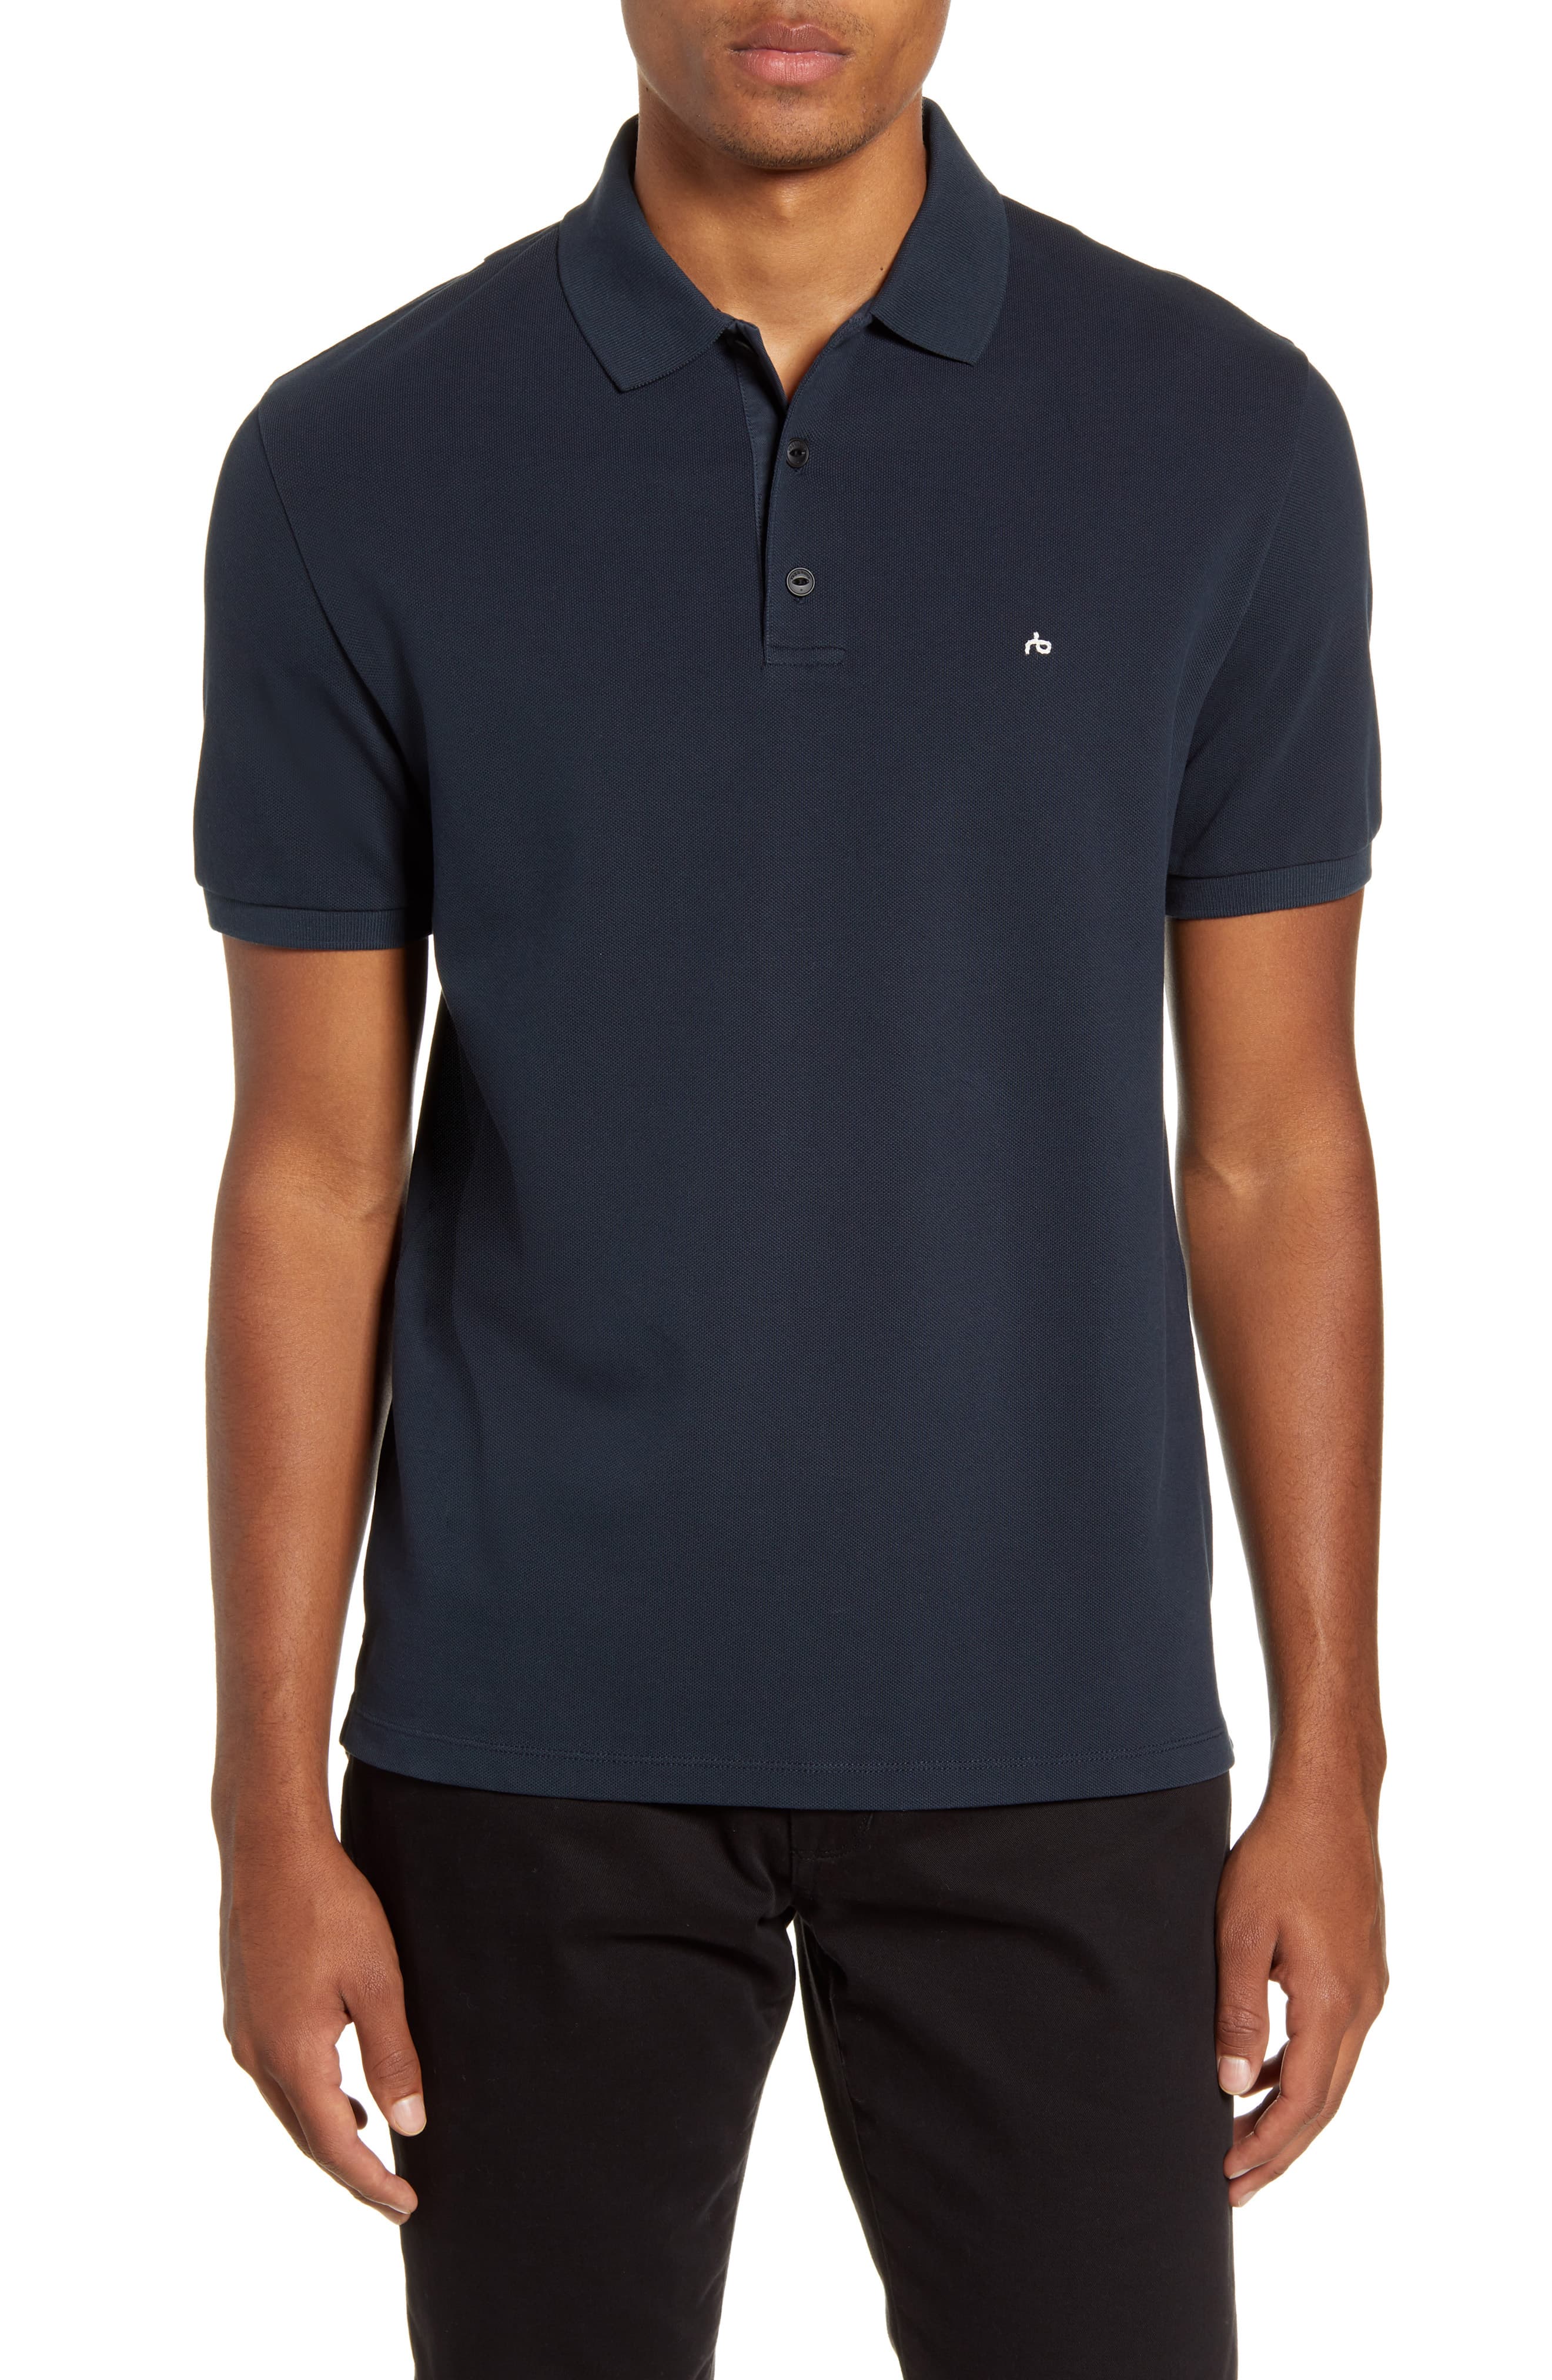 Men’s Rag & Bone Hyper Laundered Classic Fit Pique Polo, Size Small ...